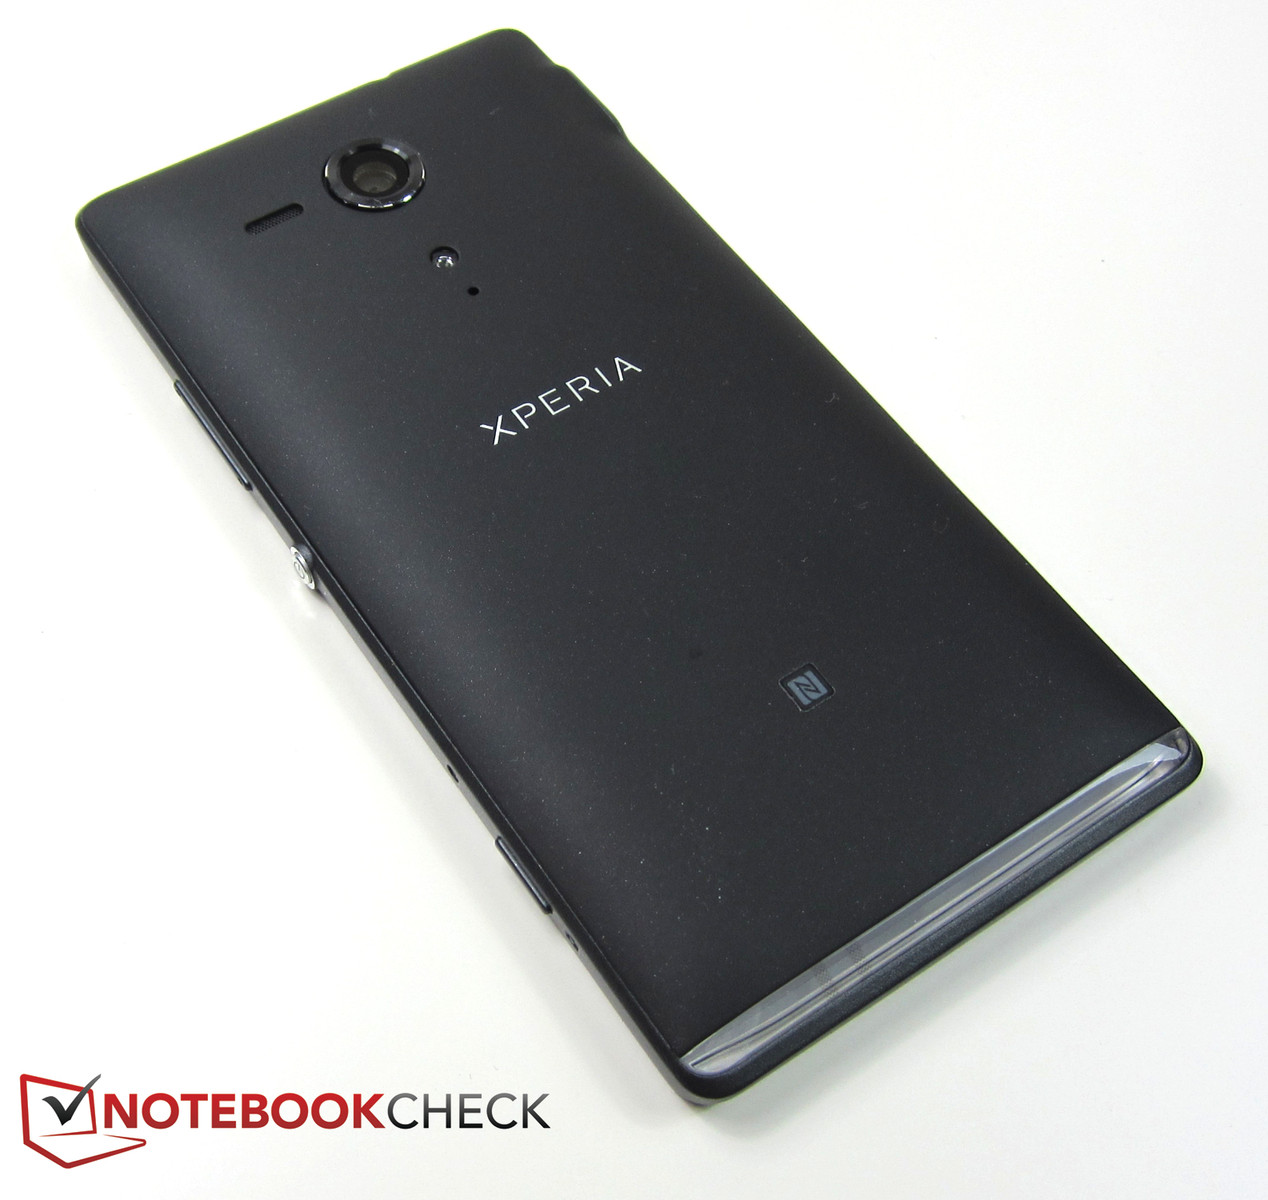 Verspilling Pretentieloos Hoorzitting Review Sony Xperia SP Smartphone - NotebookCheck.net Reviews